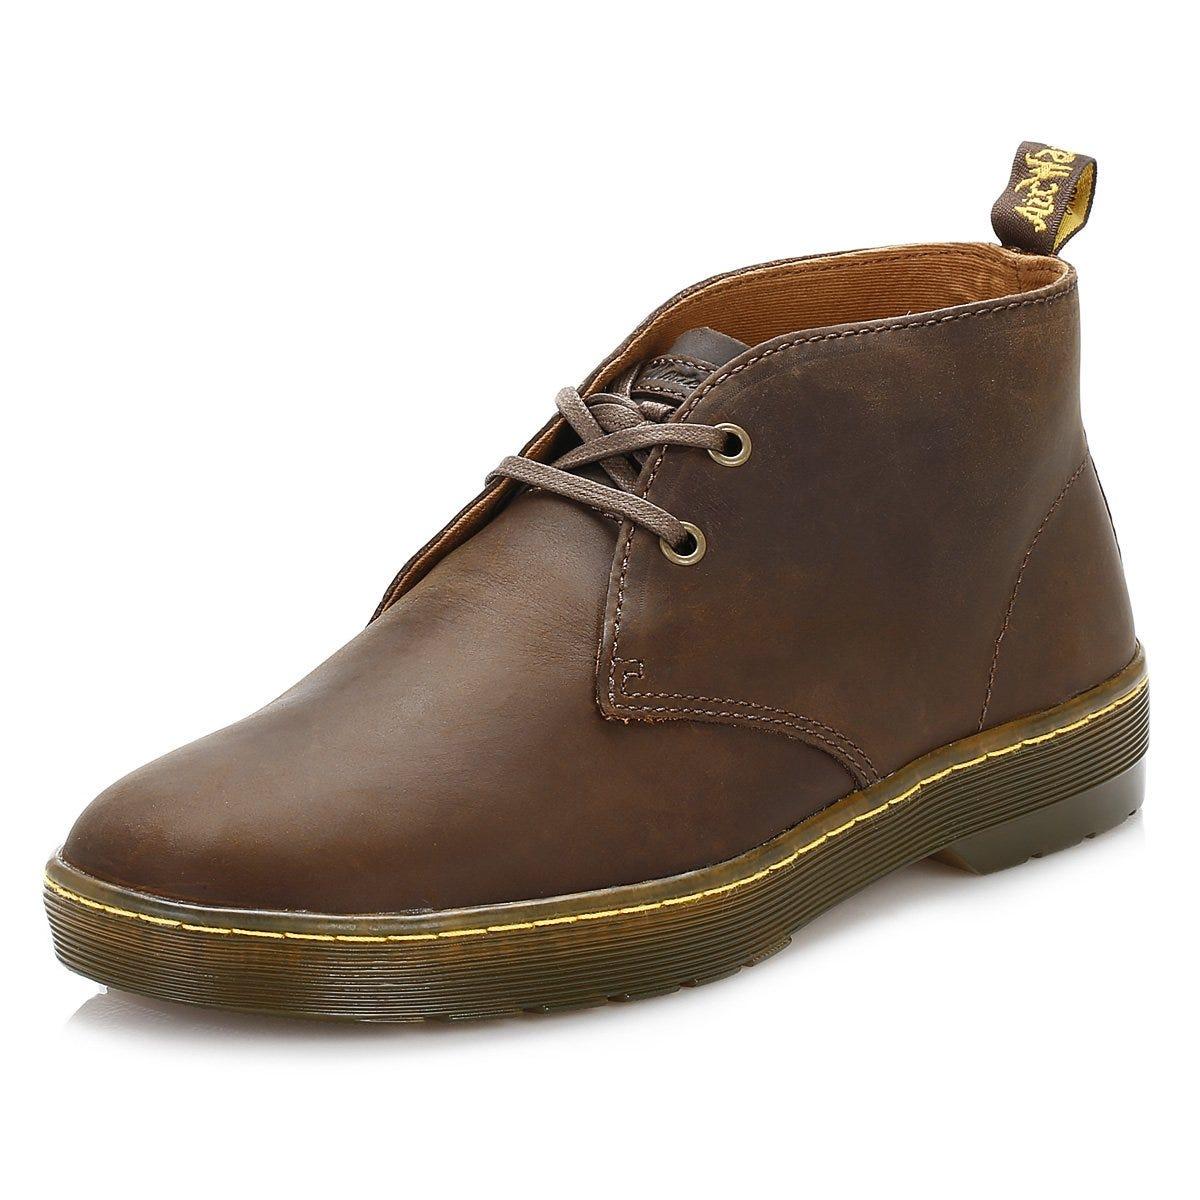 Dr. Martens Leather Cabrillo in Brown for Men - Save 73% - Lyst